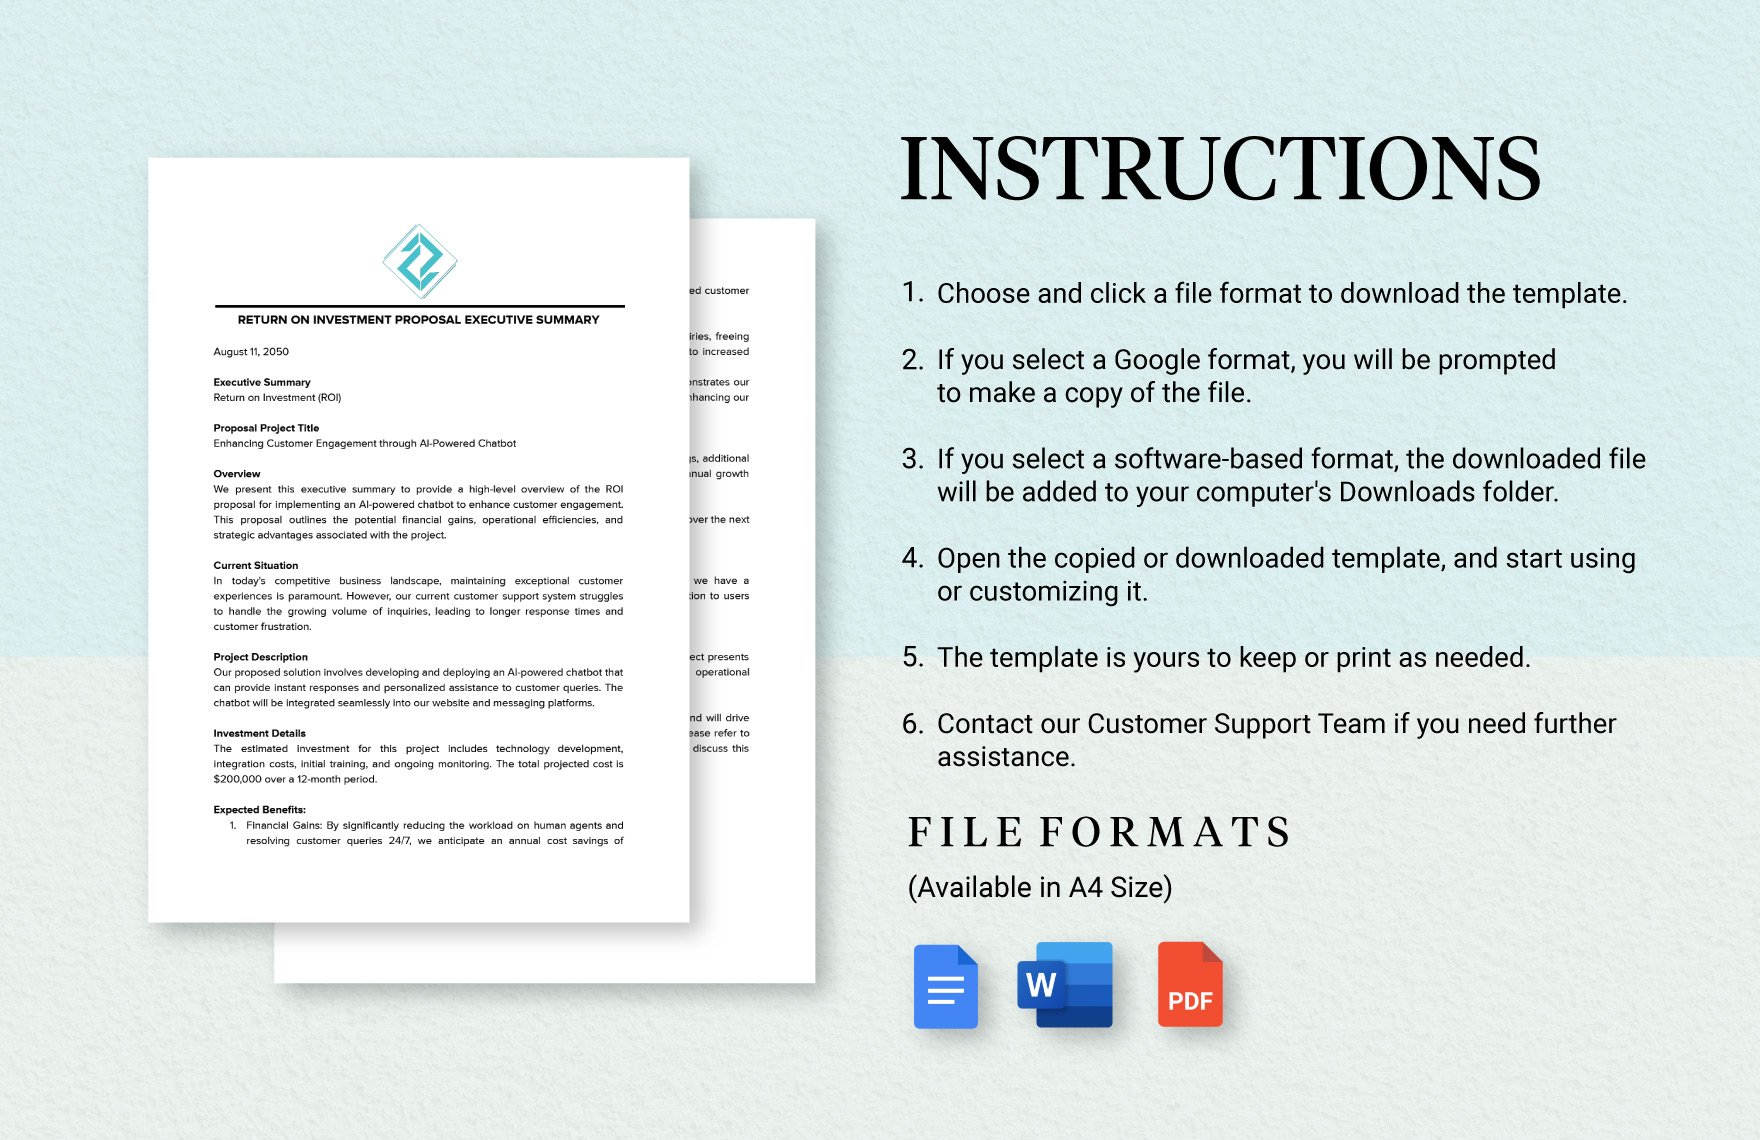 Return on Investment Proposal Executive Summary Template